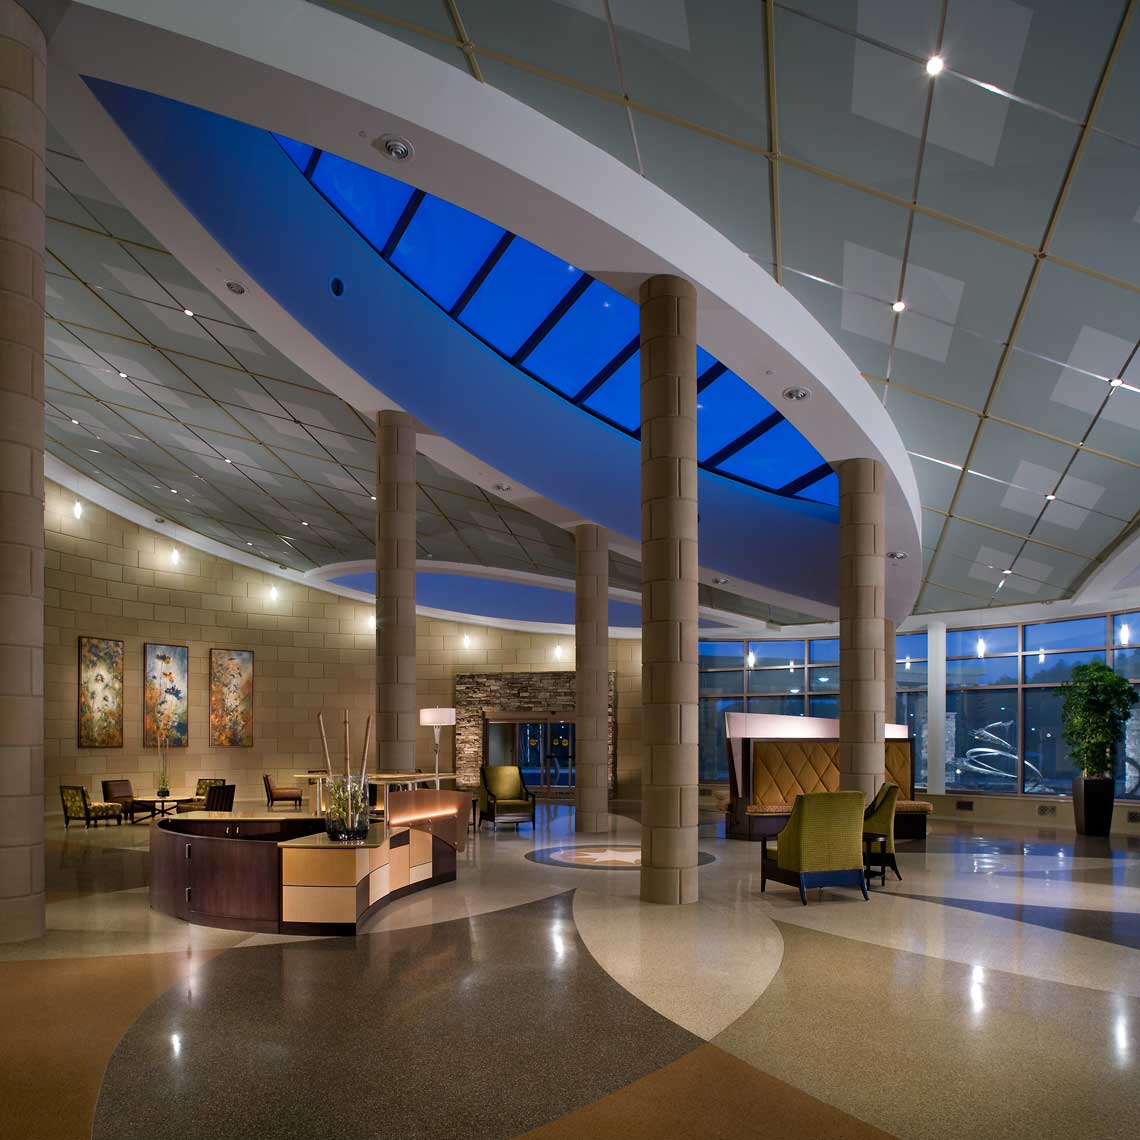 Twilight offers a stunning time to photograph the lobby of the Northside Forsyth Womens Center